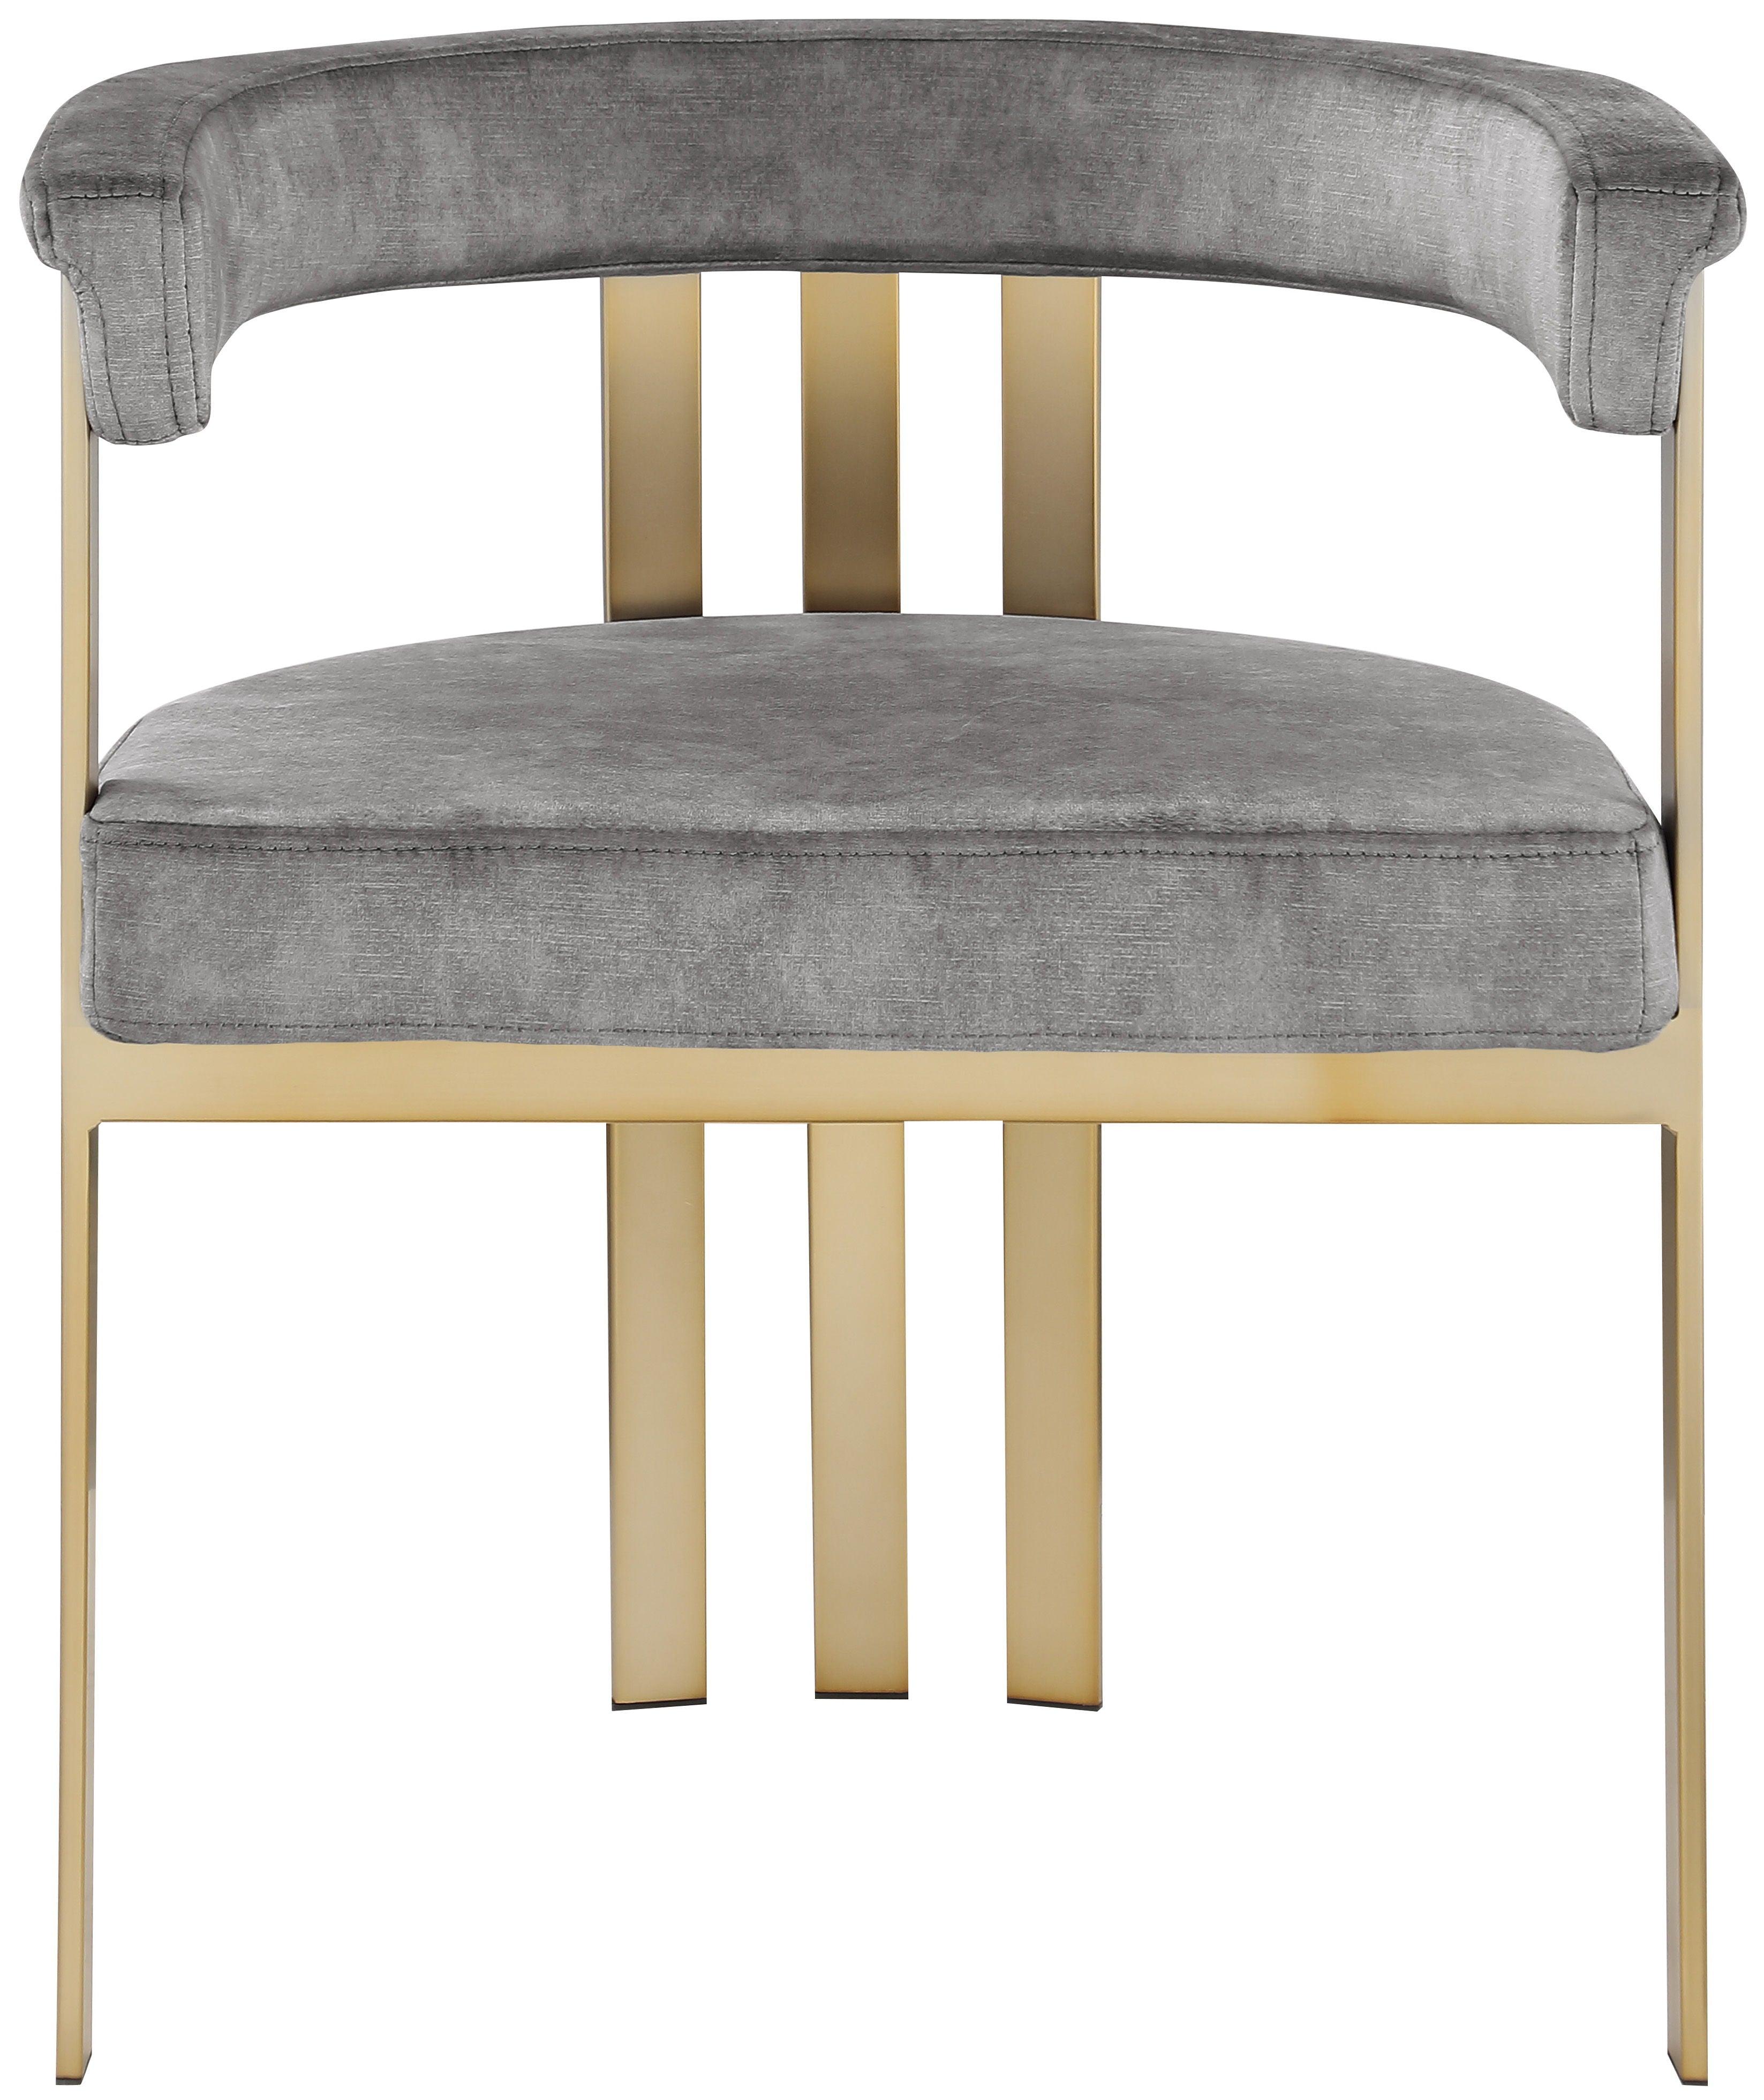 Meridian Furniture - Marcello - Dining Chair - 5th Avenue Furniture